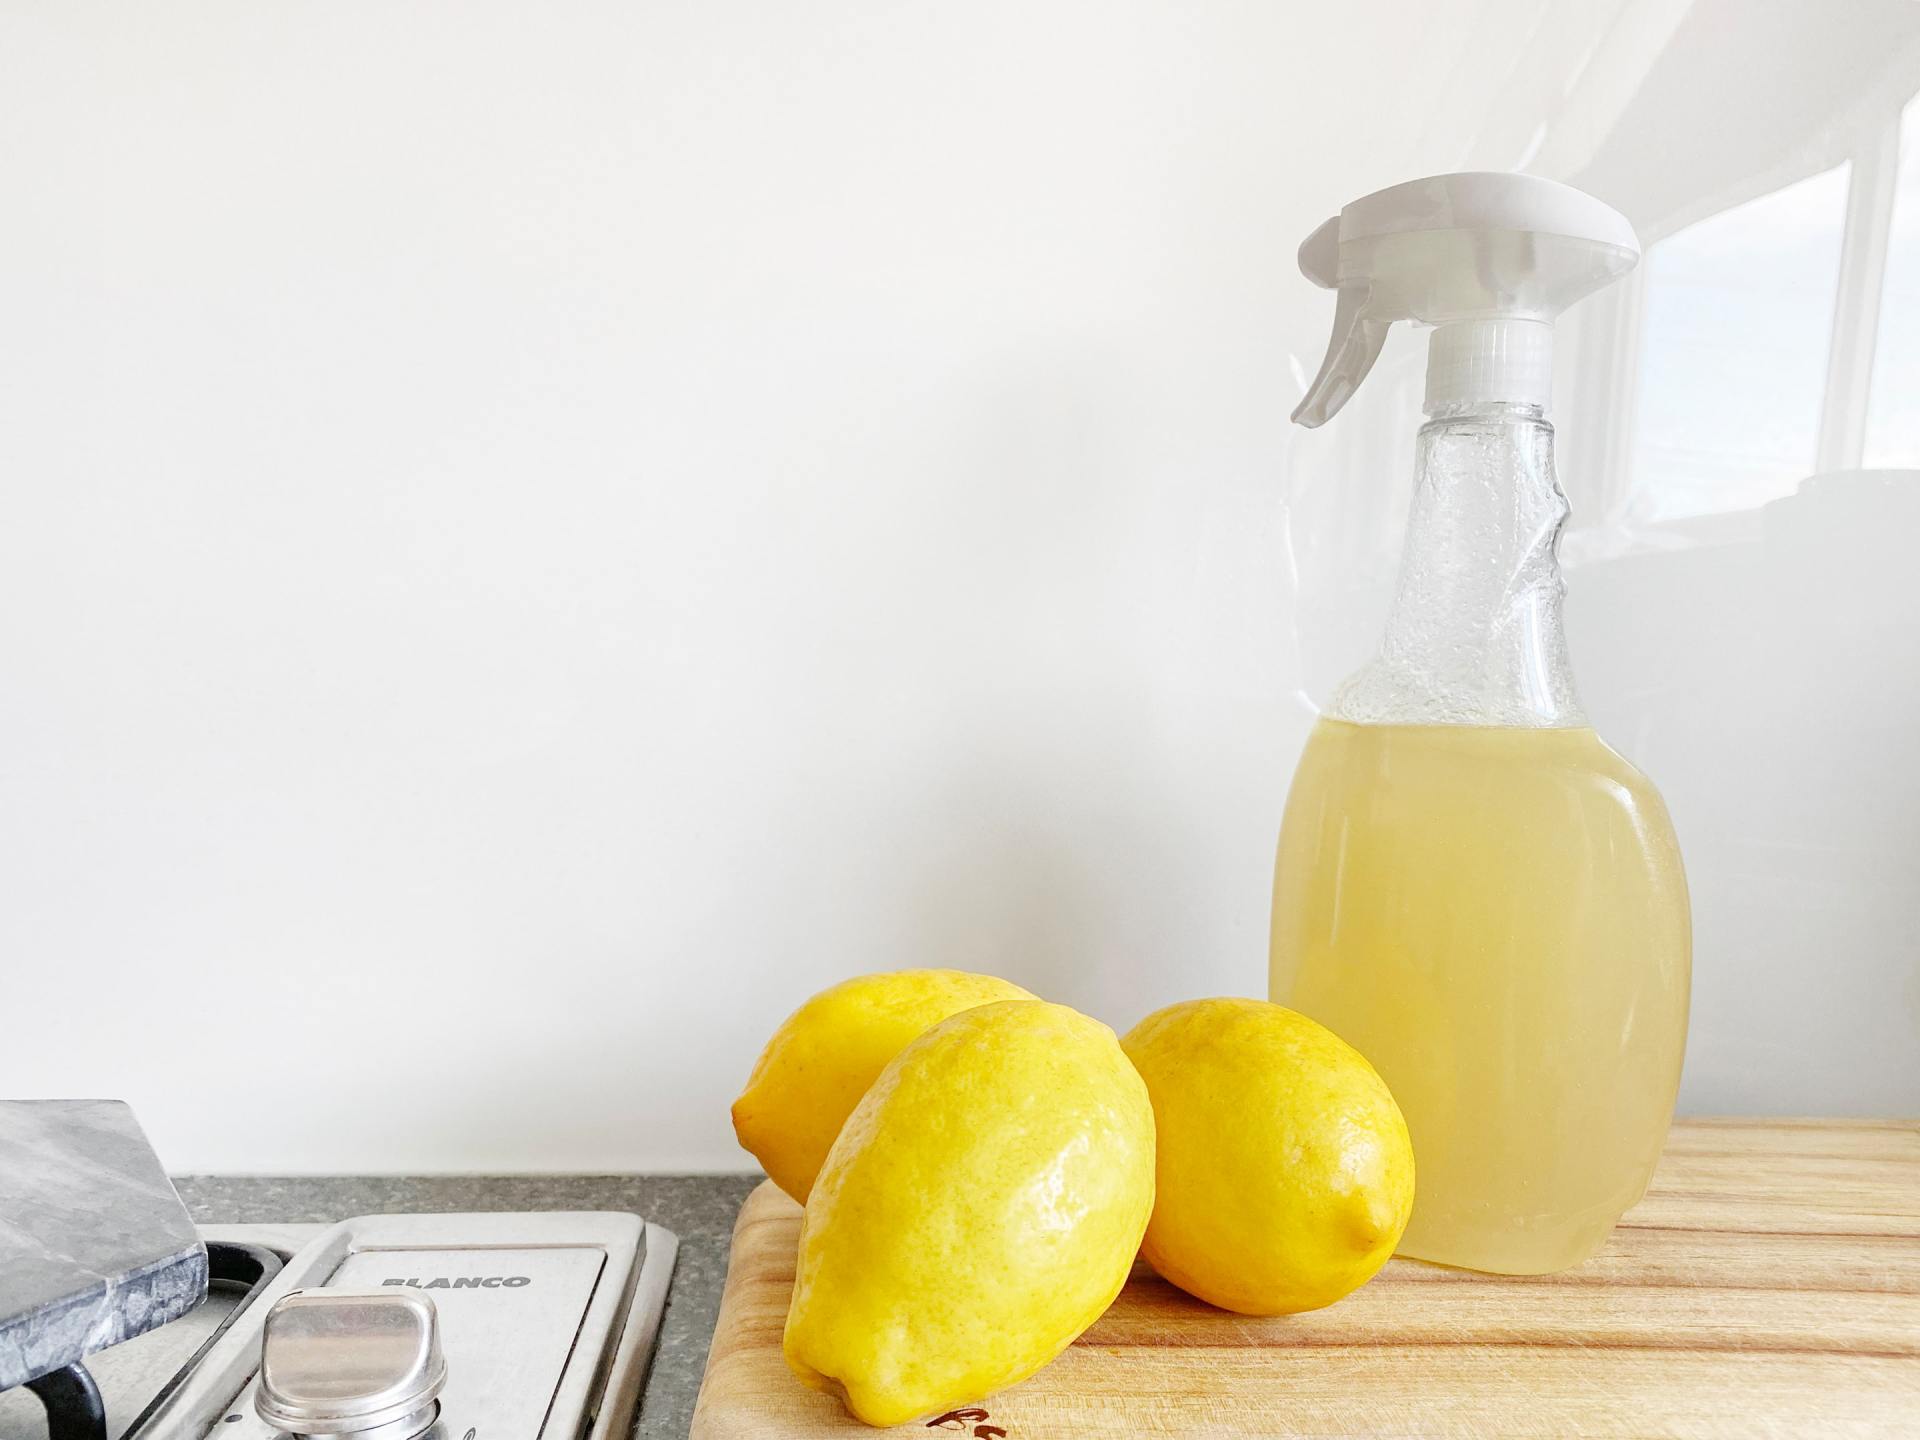 Cleaning chemicals in a spray bottle next to lemons